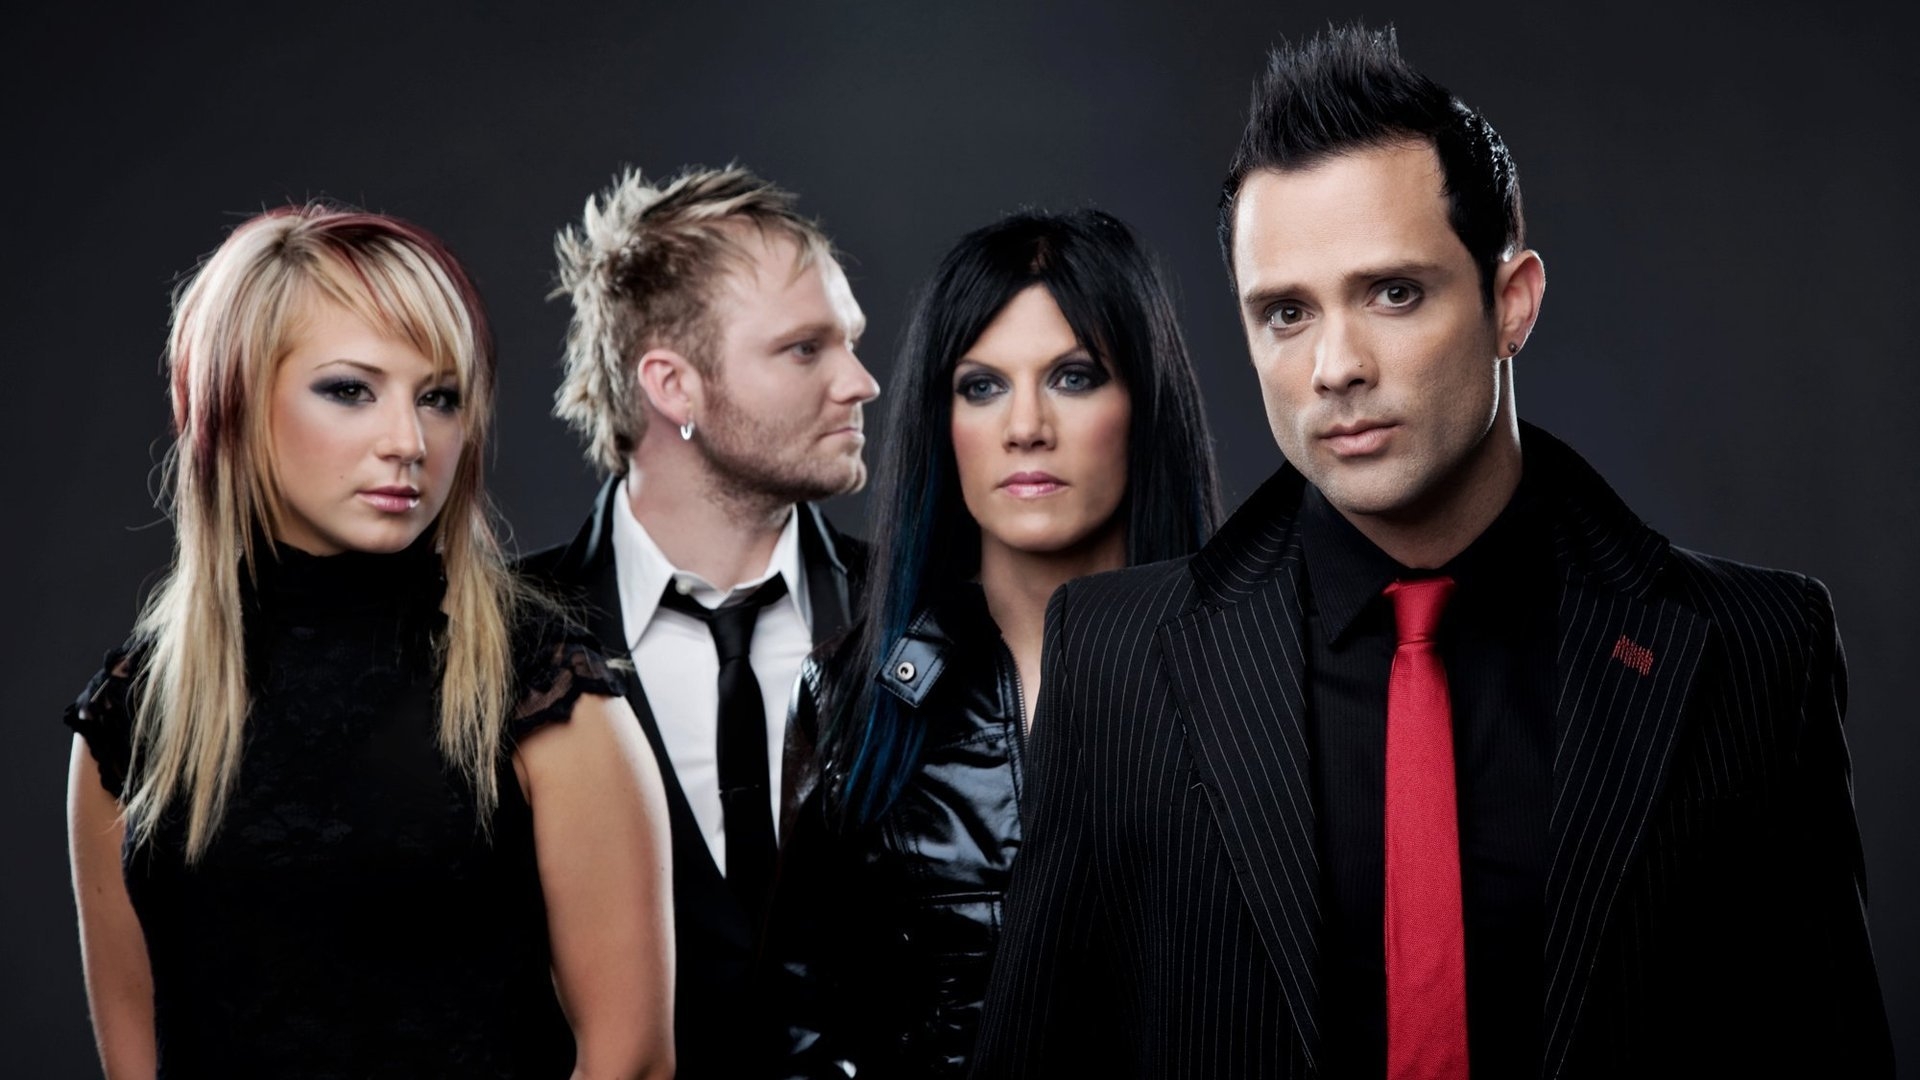 Skillet Band Members for 1920 x 1080 HDTV 1080p resolution